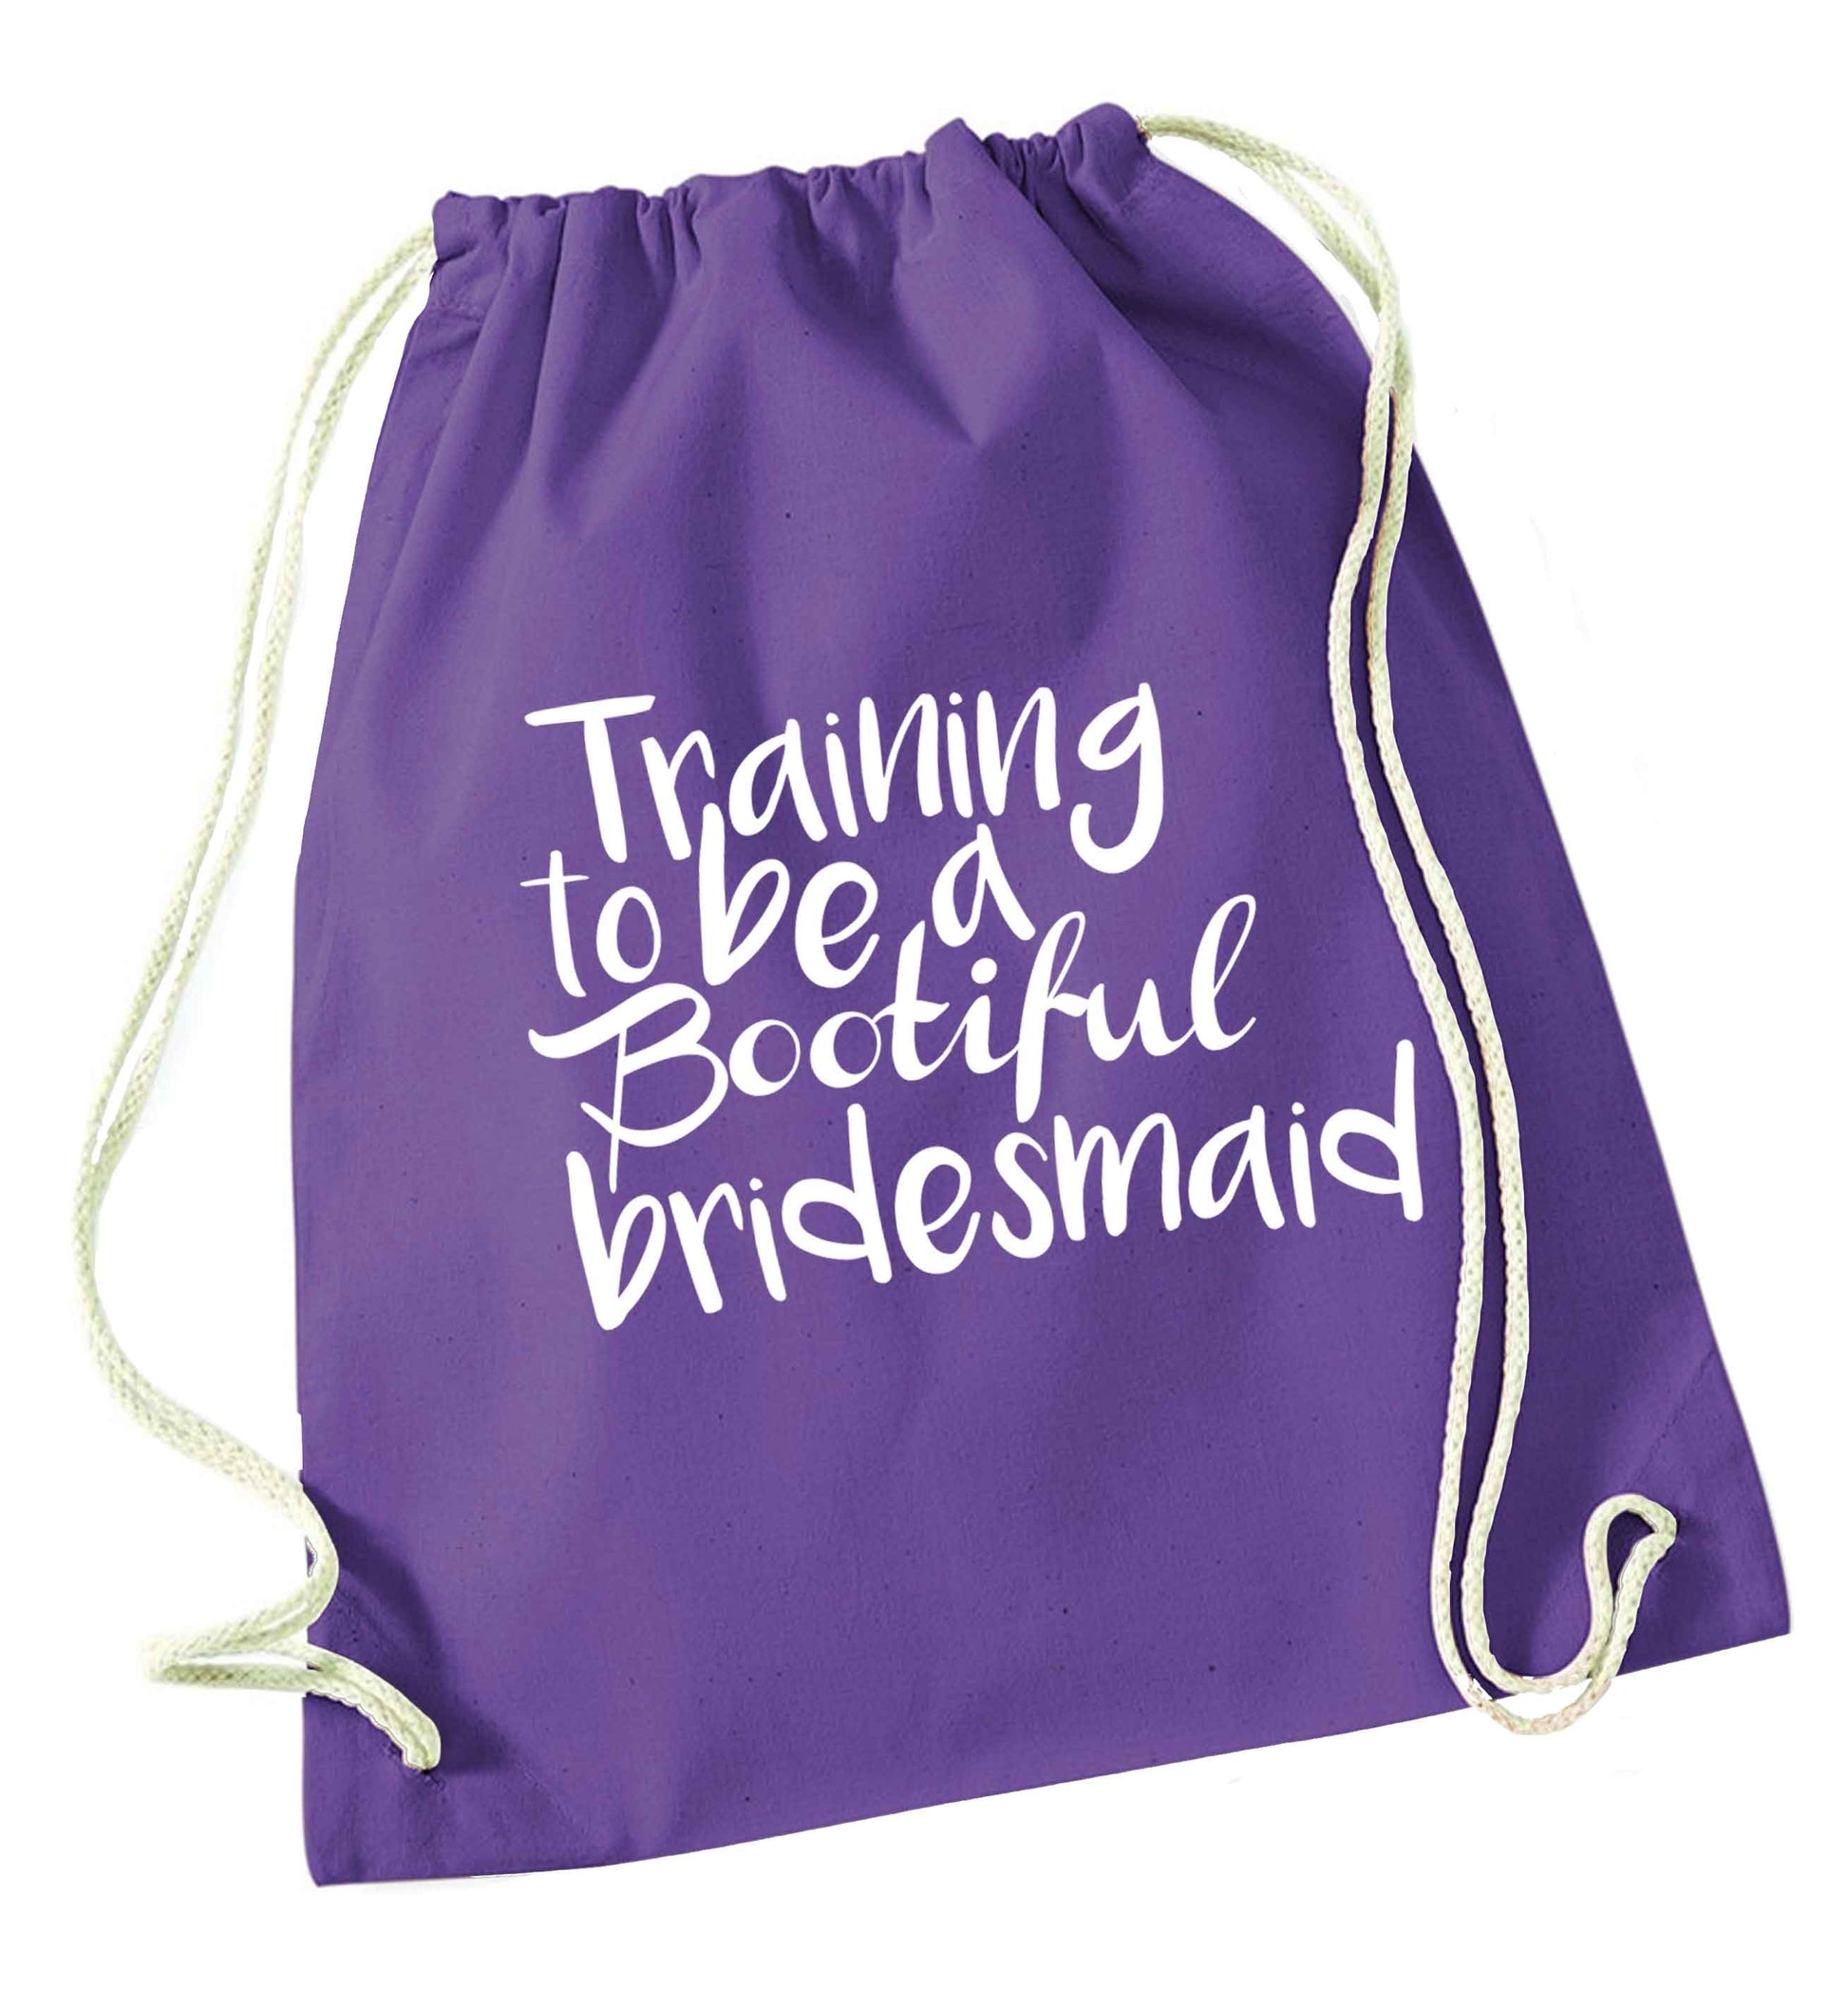 Get motivated and get fit for your big day! Our workout quotes and designs will get you ready to sweat! Perfect for any bride, groom or bridesmaid to be!  purple drawstring bag